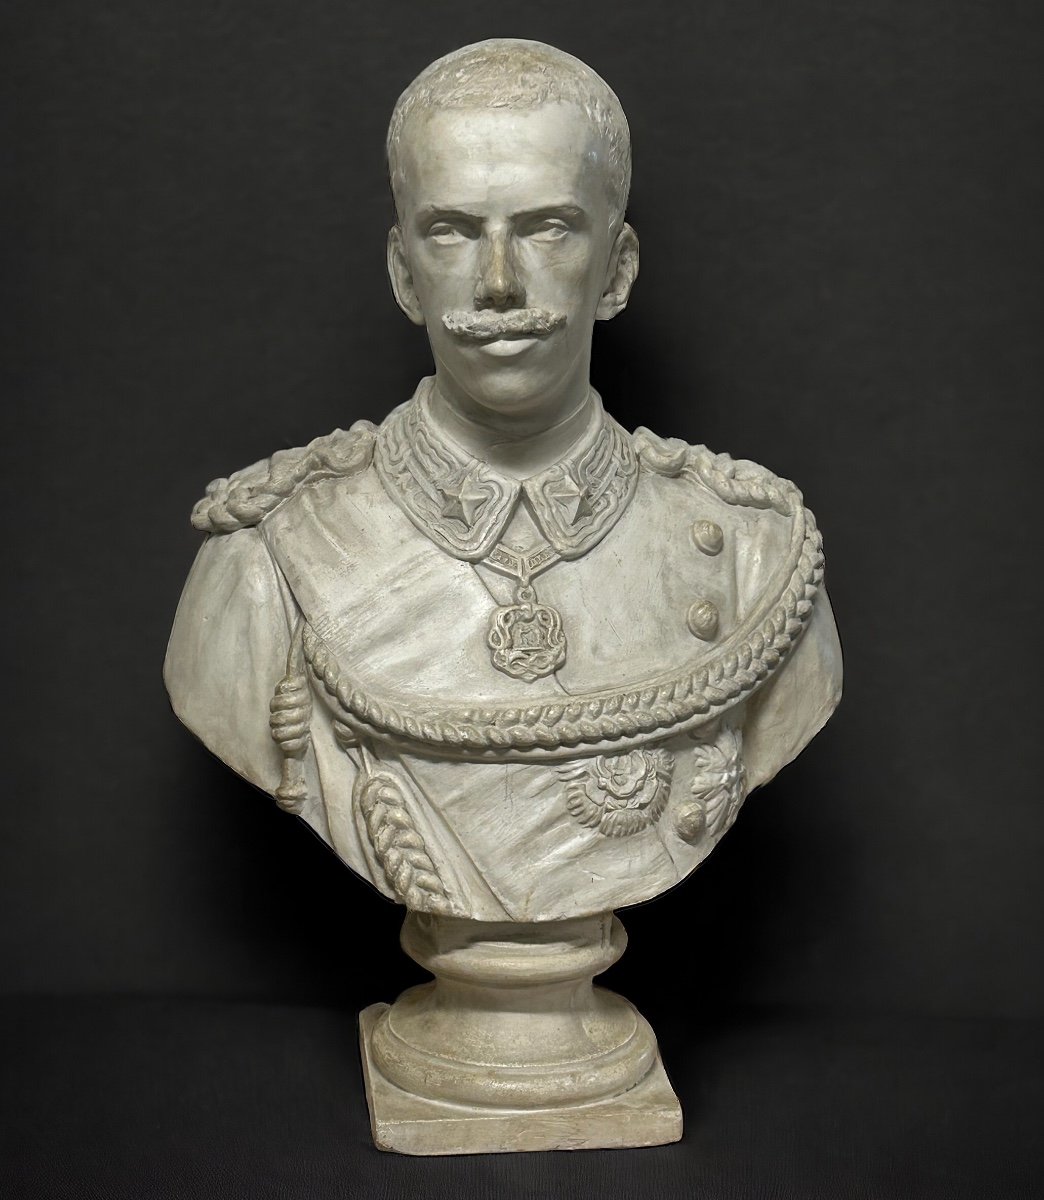 Humbert 1st King Of Italy (1844-1900) Large Plaster Bust Early 19th Century Humberto 1st 